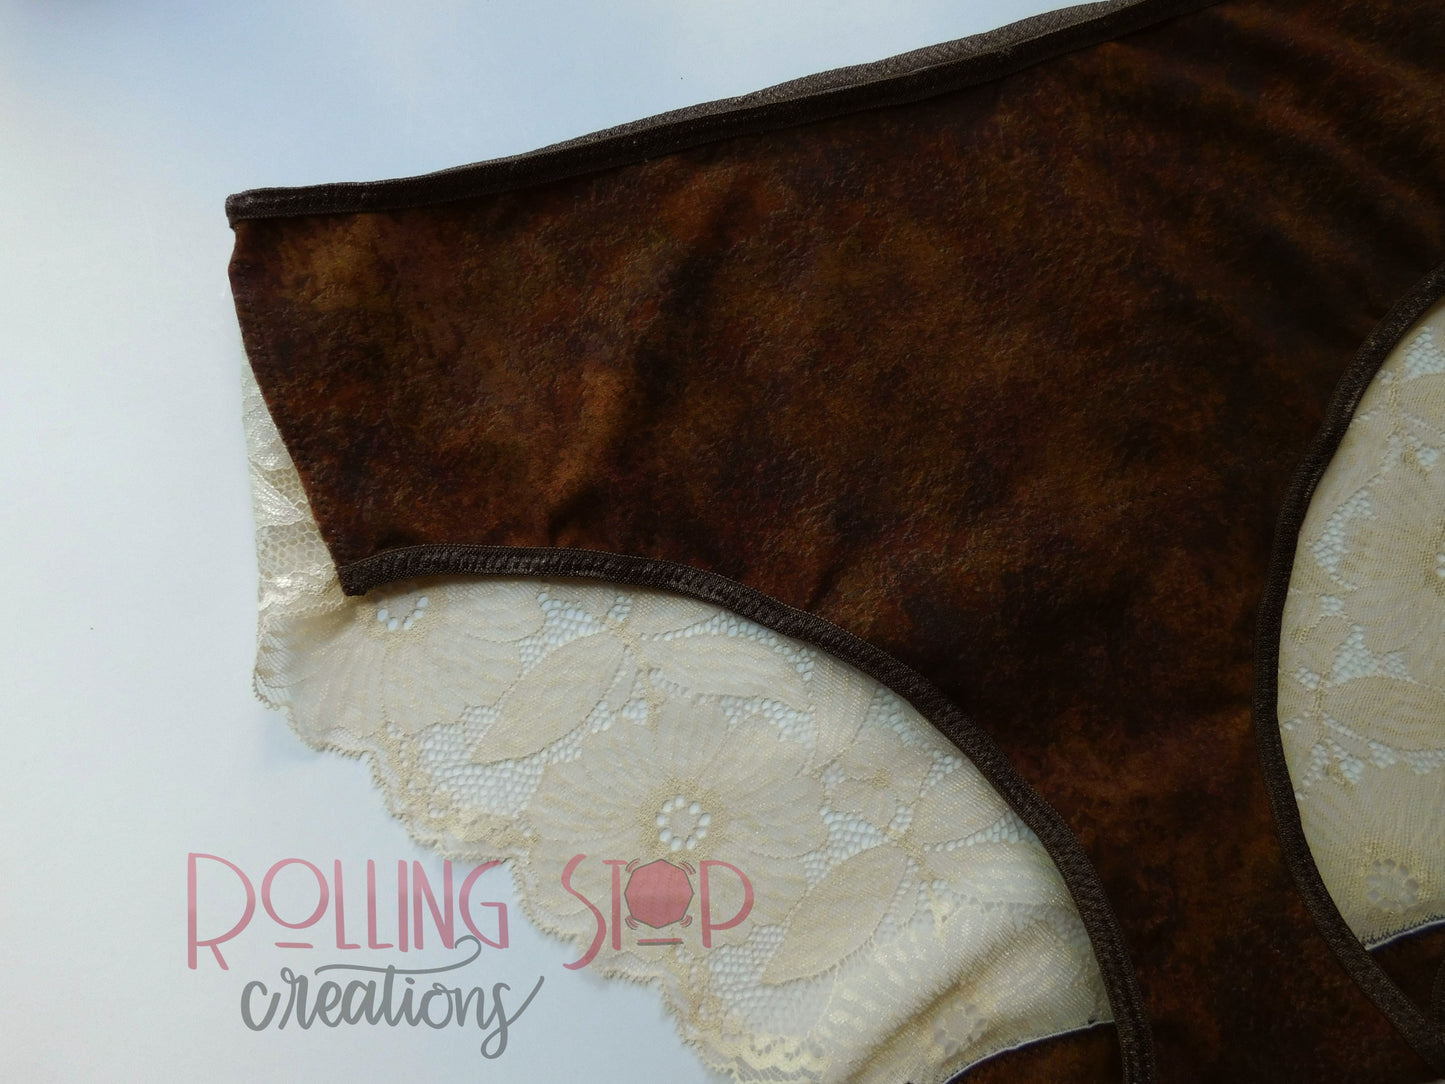 Hearts Full Lace Back Pantydrawls by Rolling Stop Creations sold by Rolling Stop Creations Lace - Lingerie - Panties